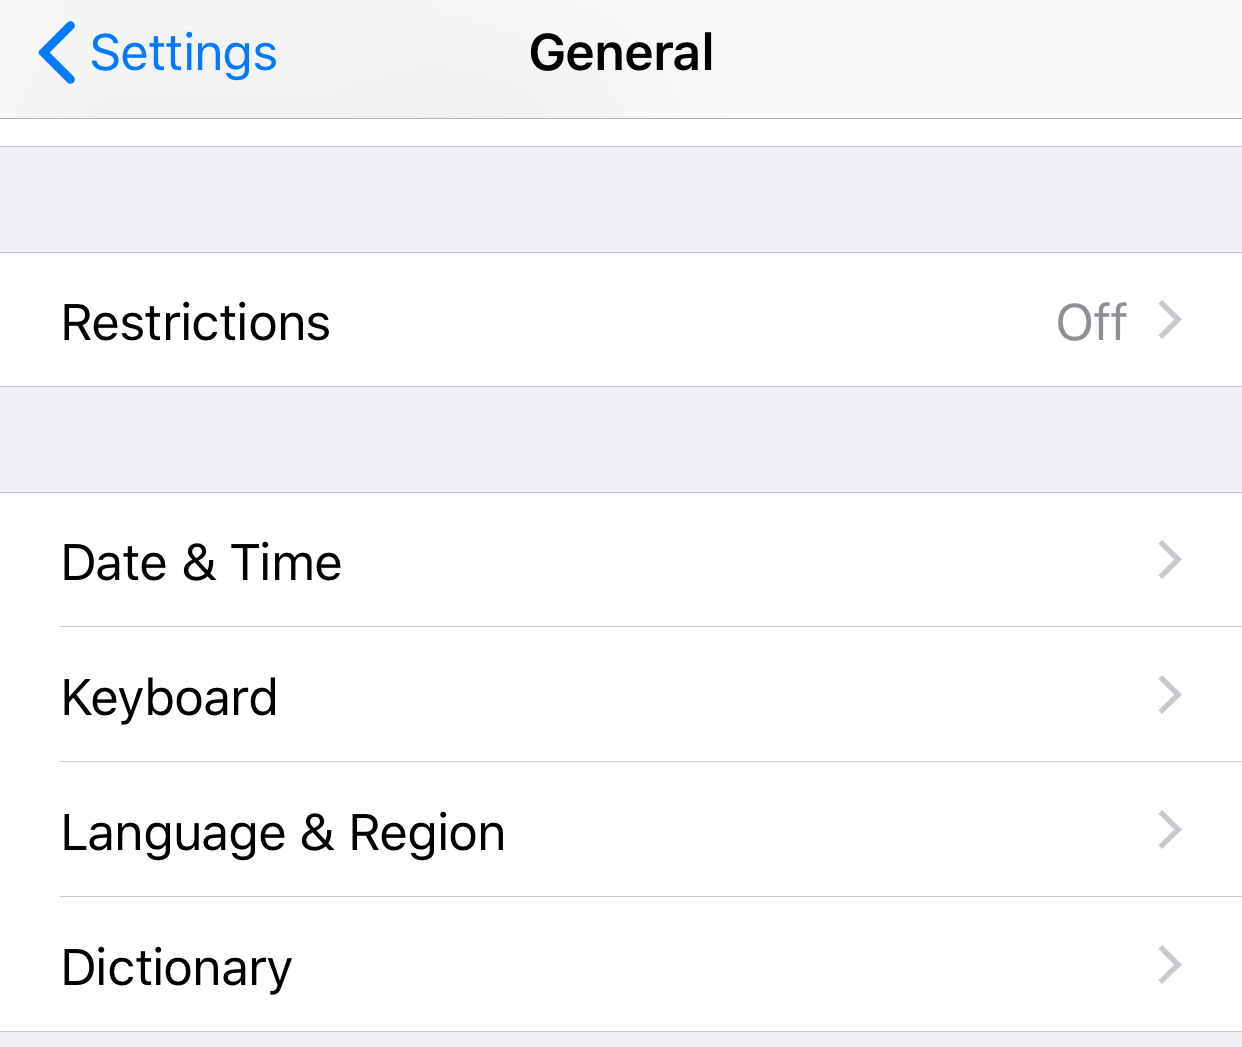 Screenshot with phone keyboard and dictionary settings